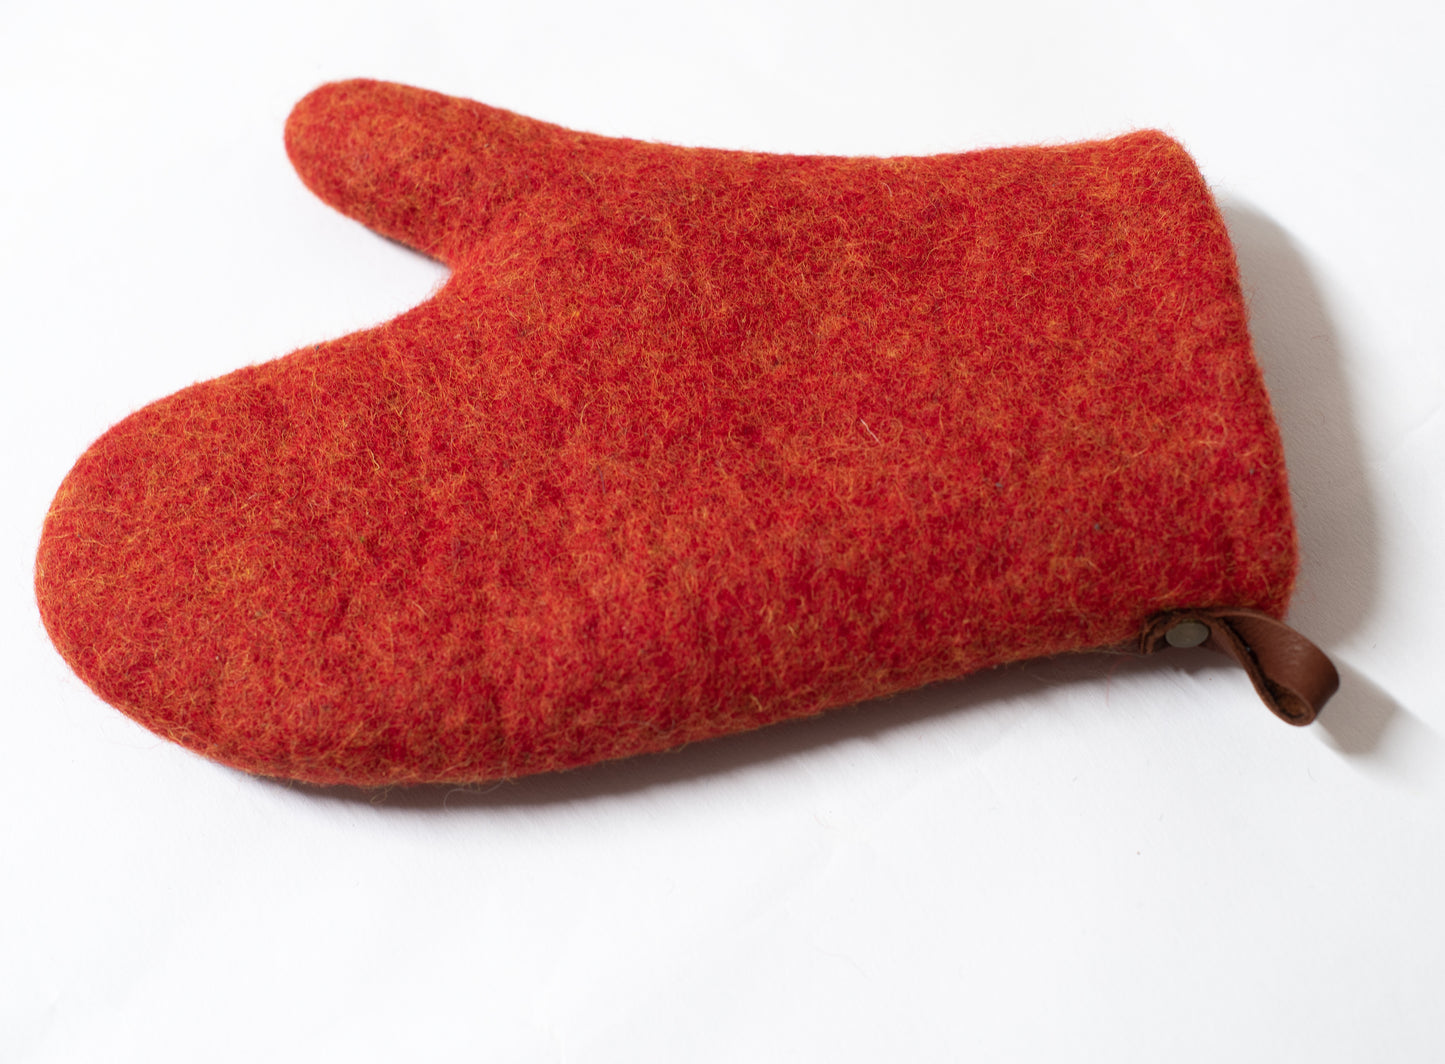 [felted_slippers],[wool_slippers], [burebure_slippers], [warm_wool_slippers], Oven Mitt Kitchen Gloves, BureBure shoes and slippers